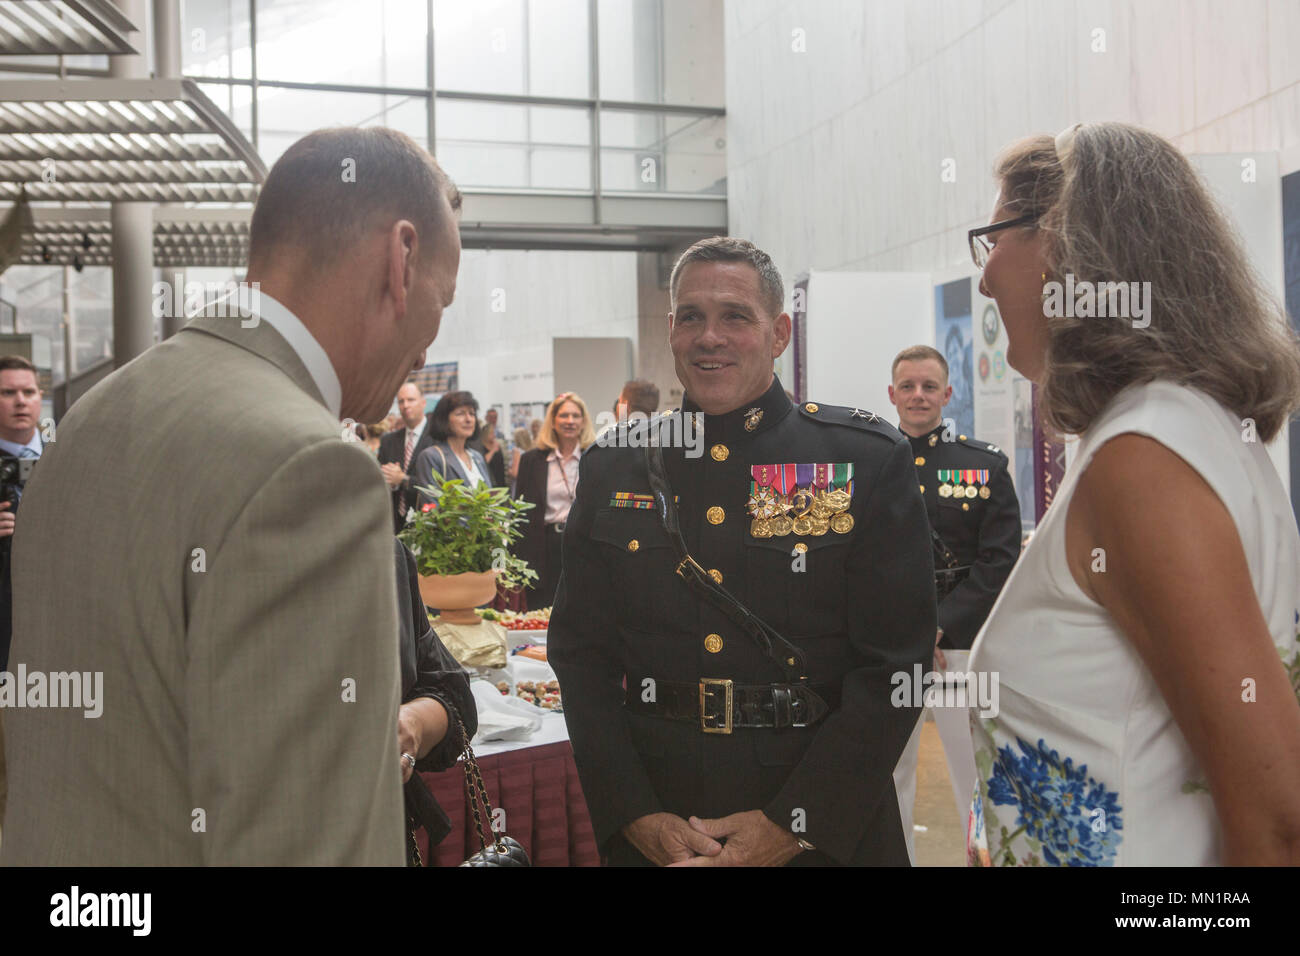 U.S. Marine Corps Maj Gen. John R. Ewers Jr., staff judge advocate to the Commandant, speaks with guests during a sunset parade reception at the Women in Military Service for America Memorial, Arlington, Virginia, Aug 1, 2017. Sunset parades are held as a means of honoring senior officials, distinguished citizens and supporters of the Marine Corps. (U.S. Marine Corps photo by Lance Cpl. Stephon L. McRae) Stock Photo